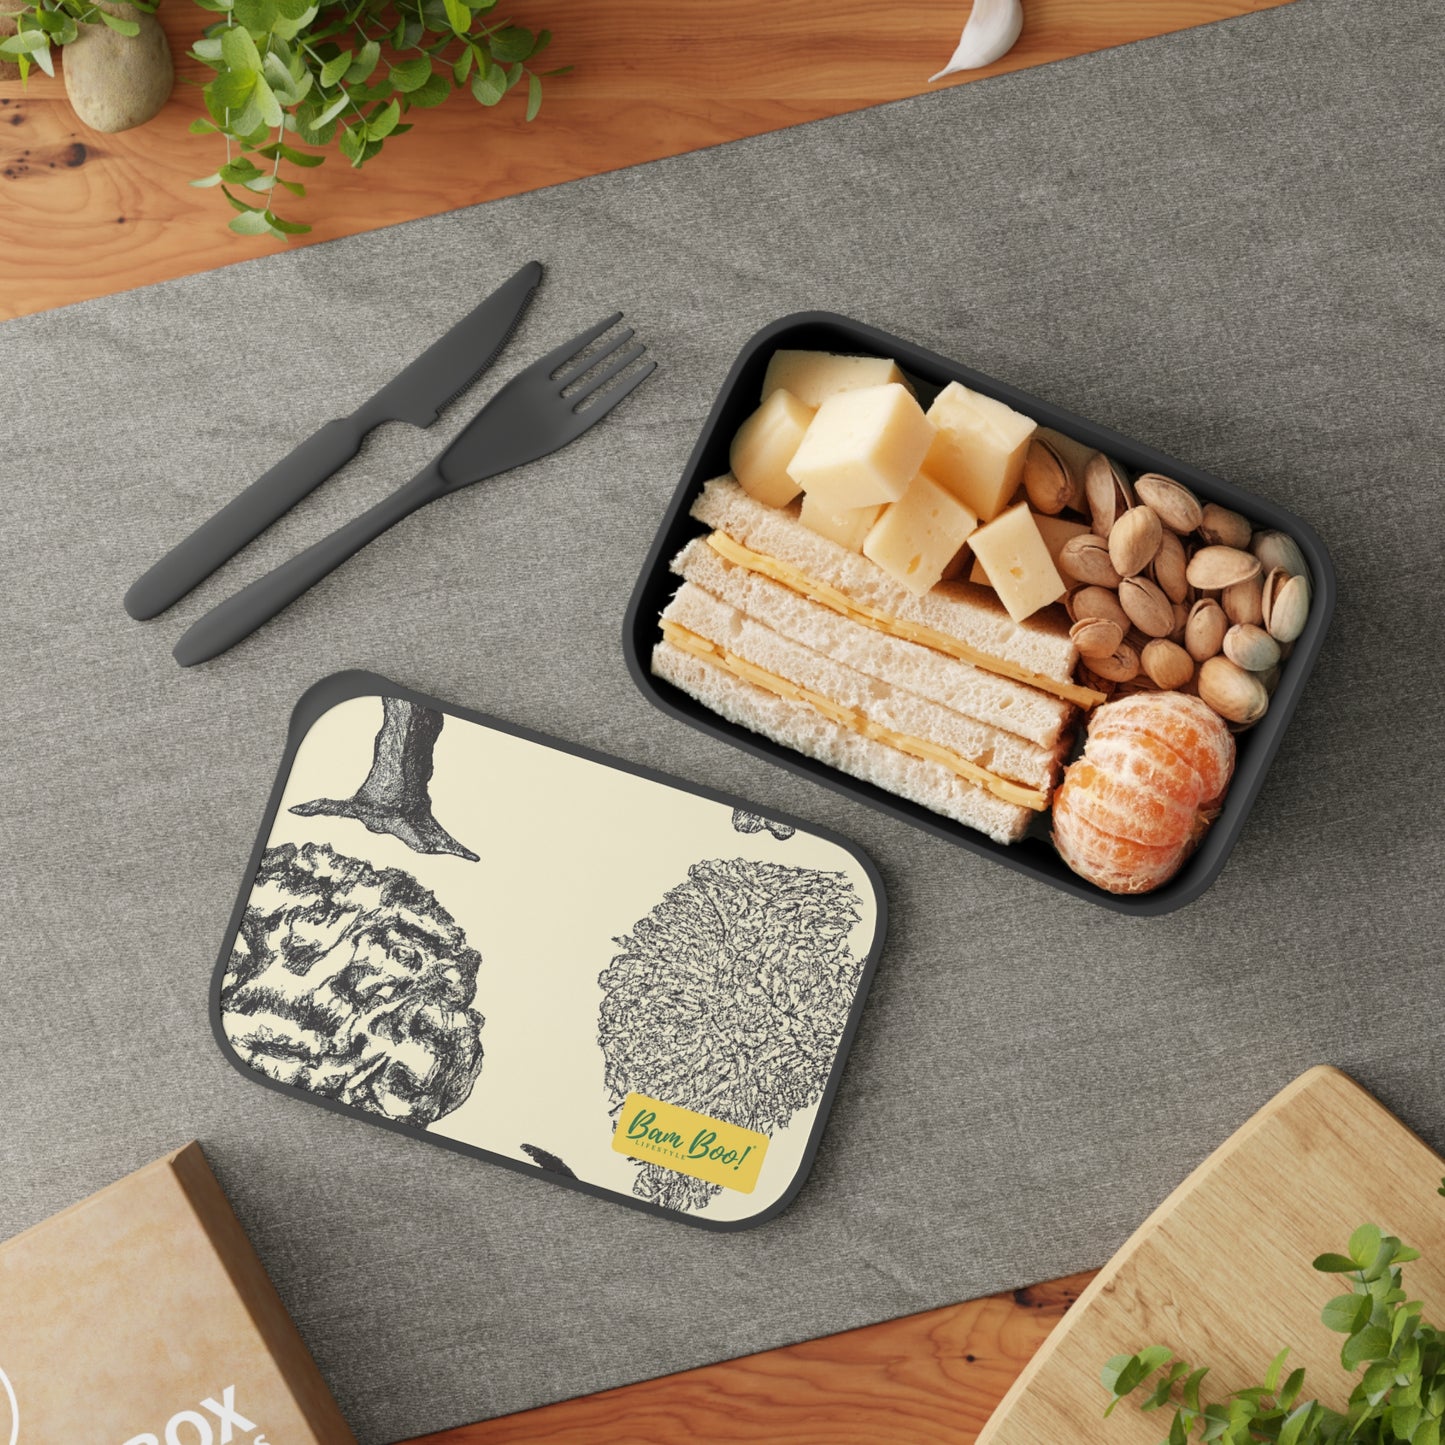 "Artistic Self-Expression: Combining Image, Texture, Pattern, and Color" - Bam Boo! Lifestyle Eco-friendly PLA Bento Box with Band and Utensils